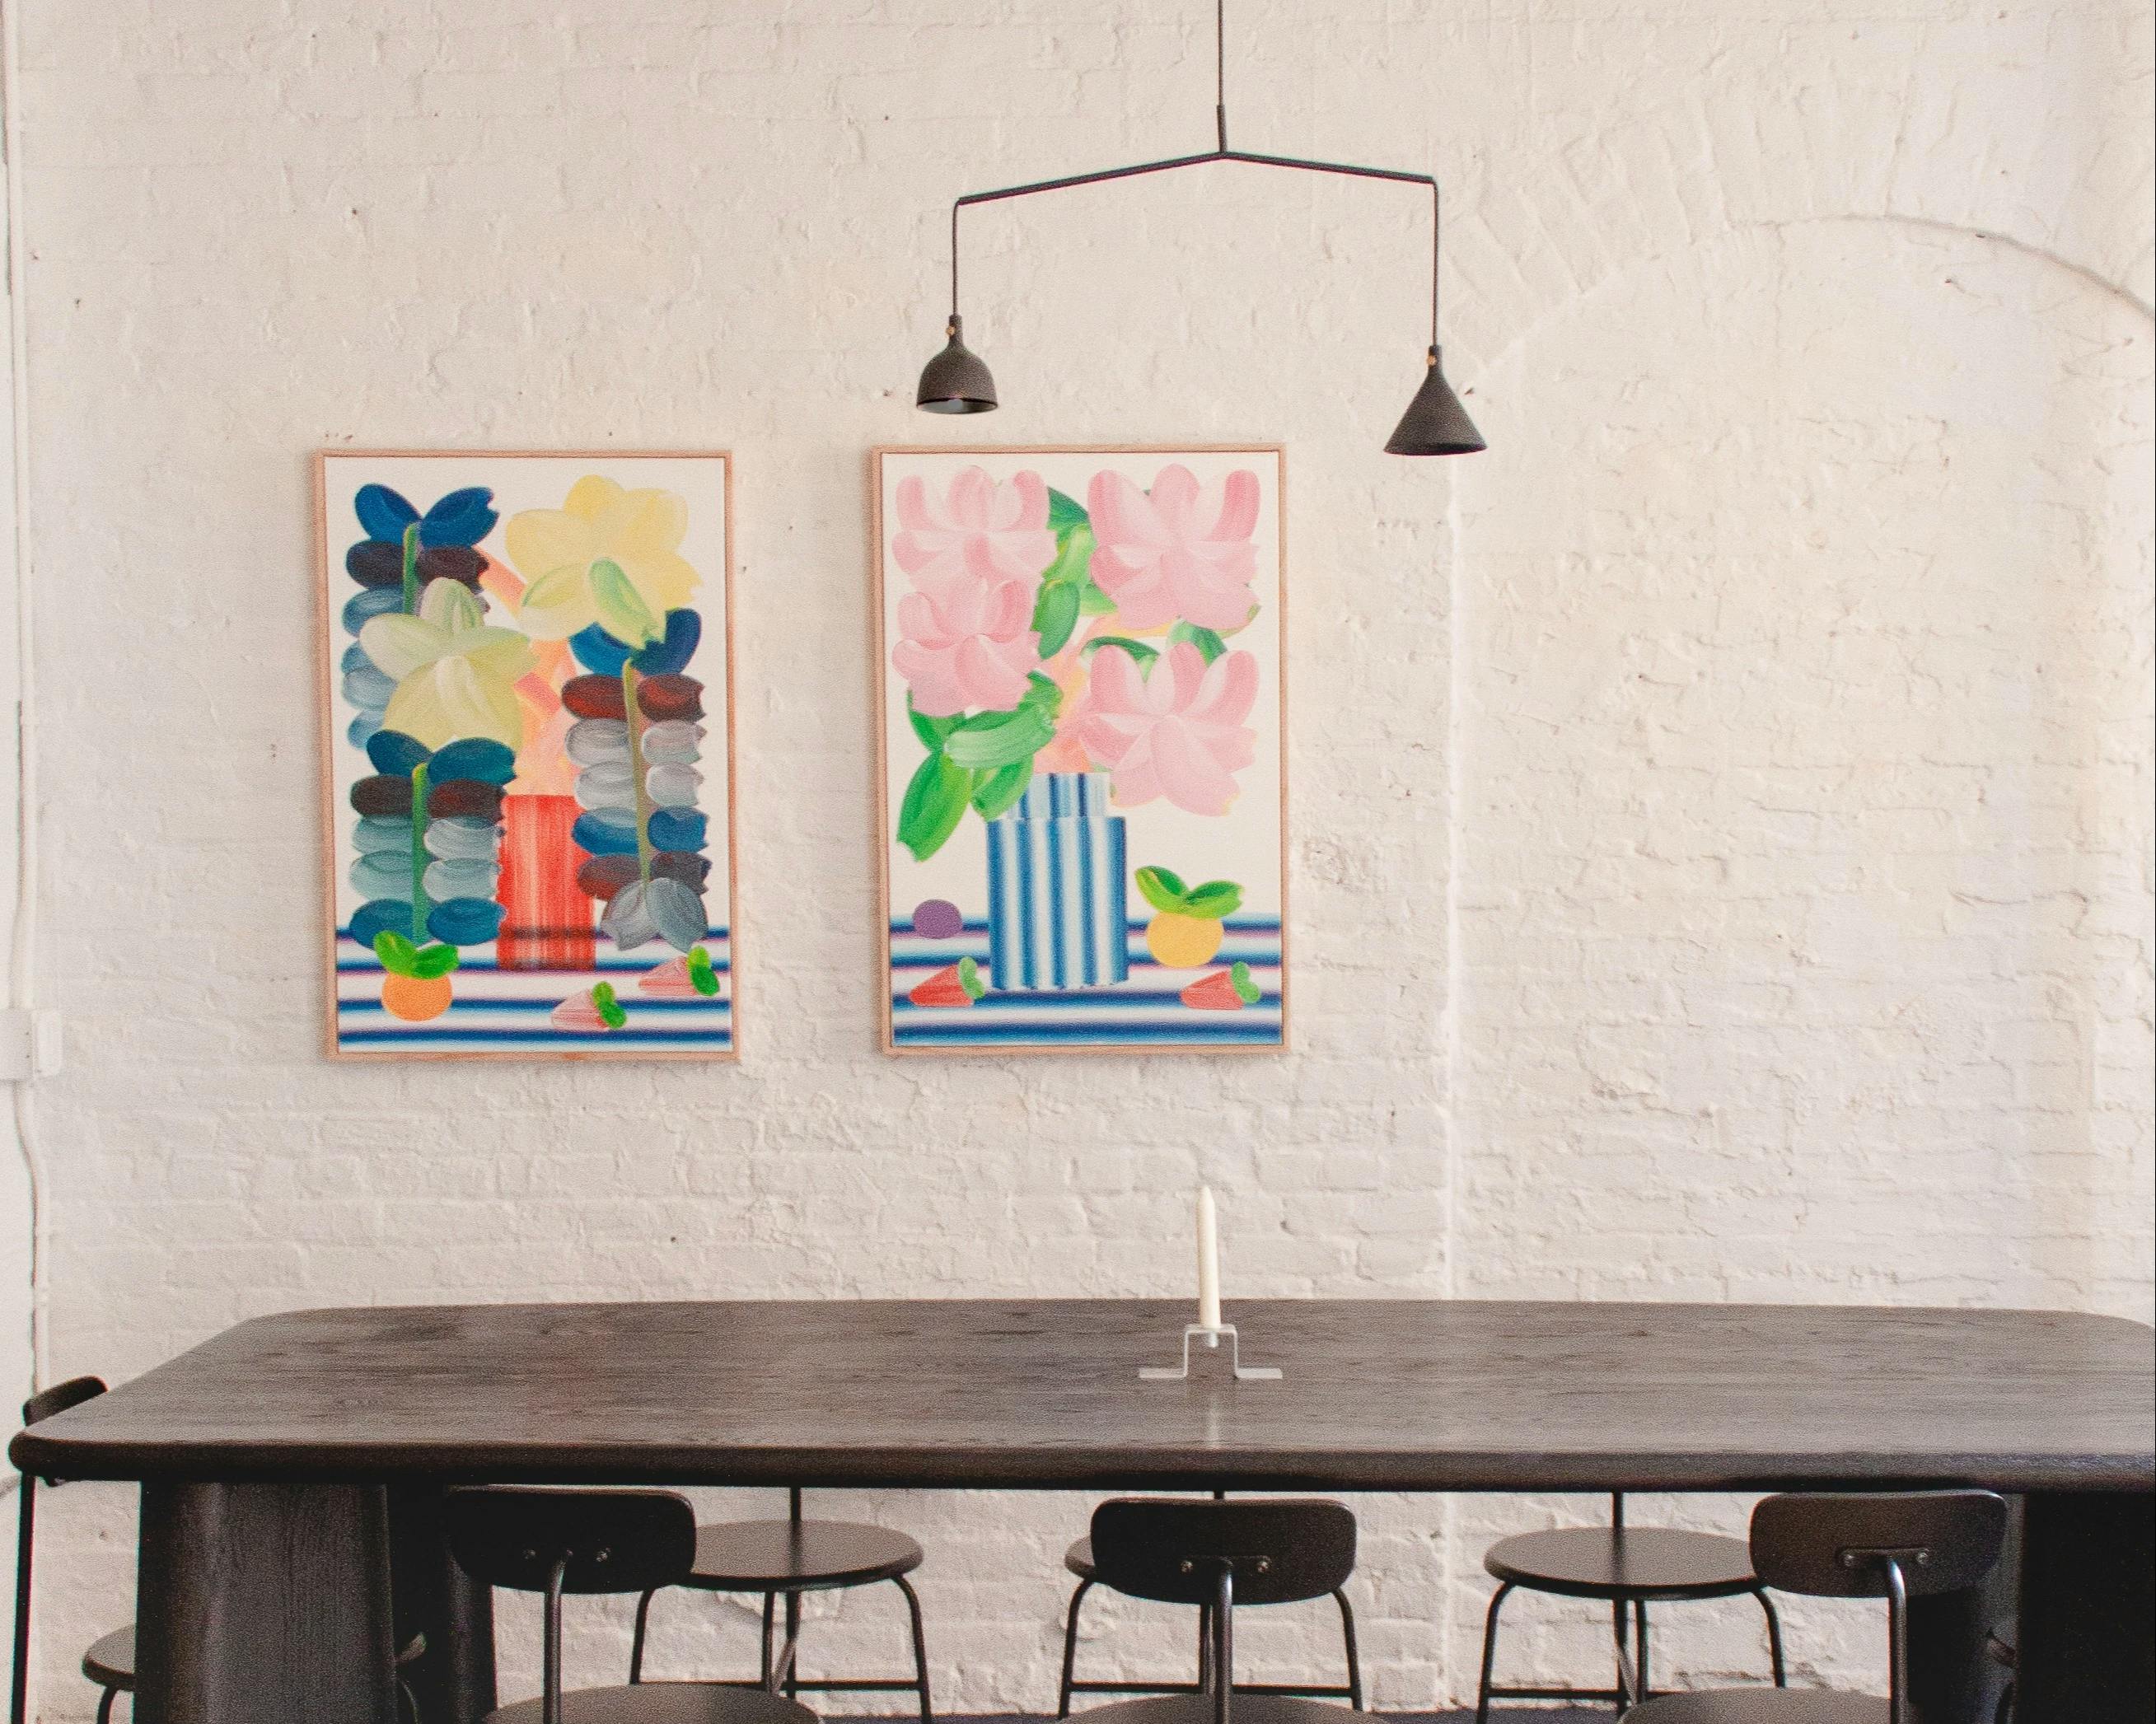 Two colorful still life paintings by artist Erin D. Garcia on a white brick wall above a black dining room table at Uprise Art.